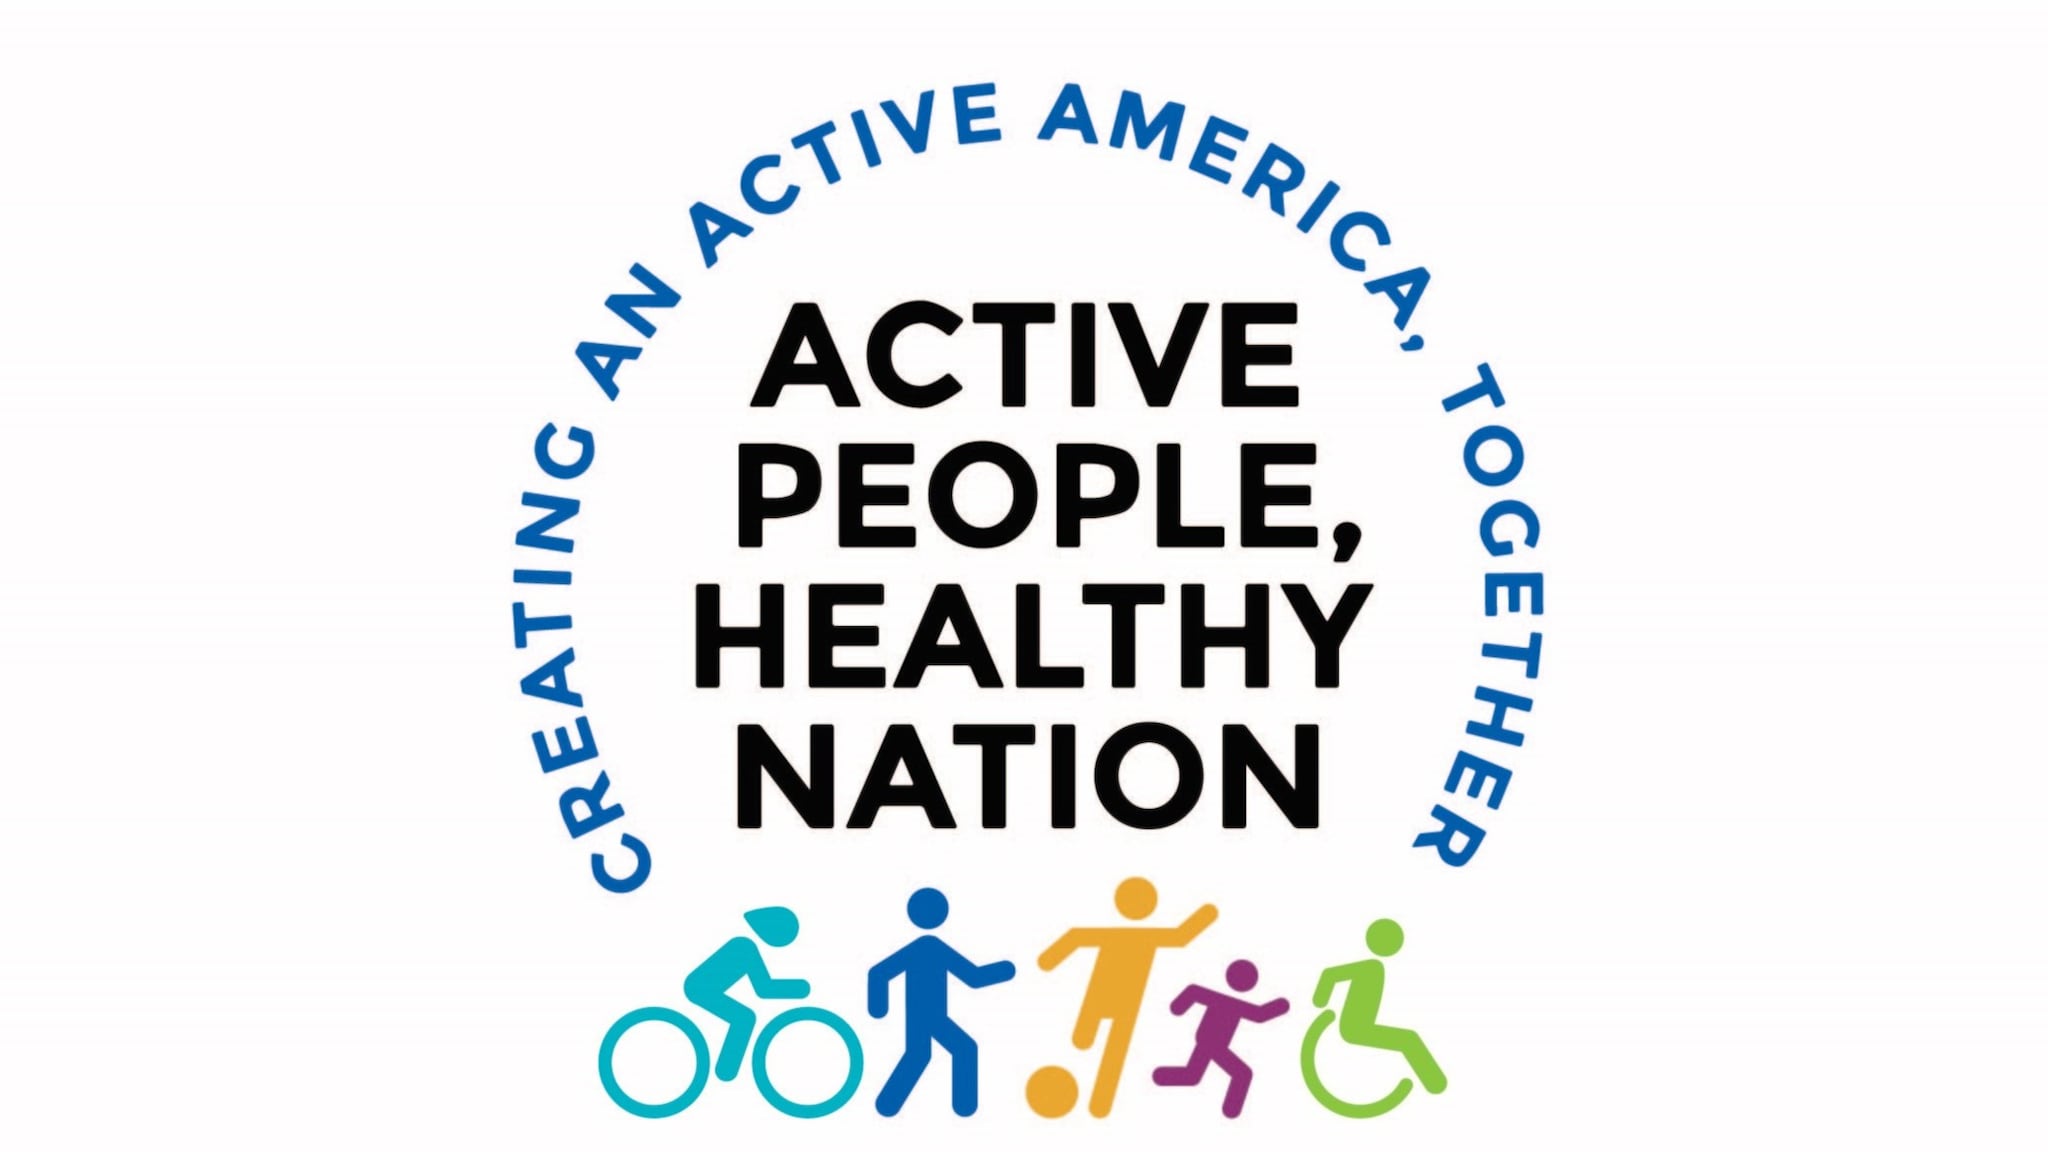 The Active People, Healthy Nation design element